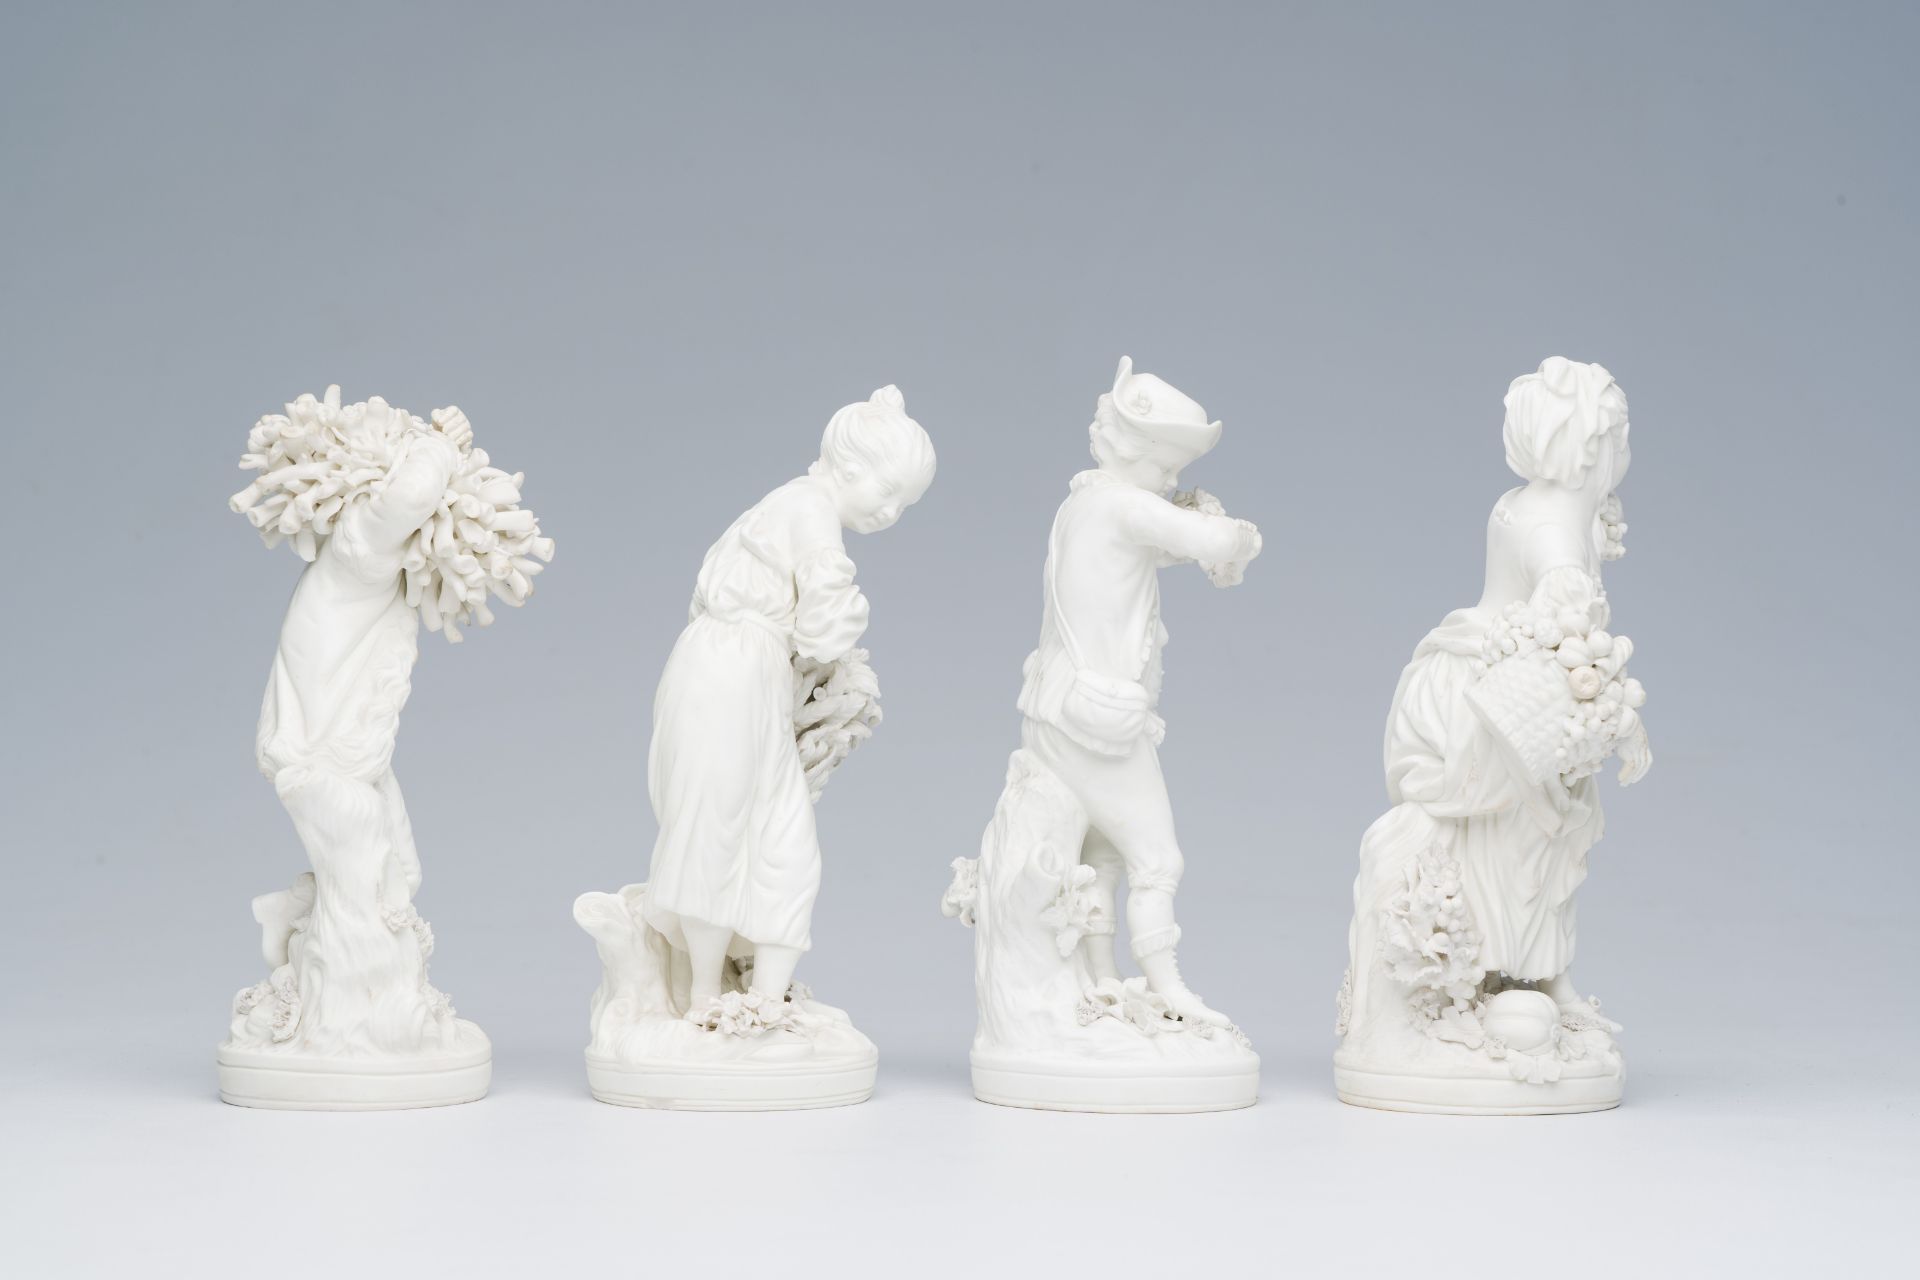 Four fine English biscuit figures depicting the 'four seasons', 19th C. - Image 5 of 7